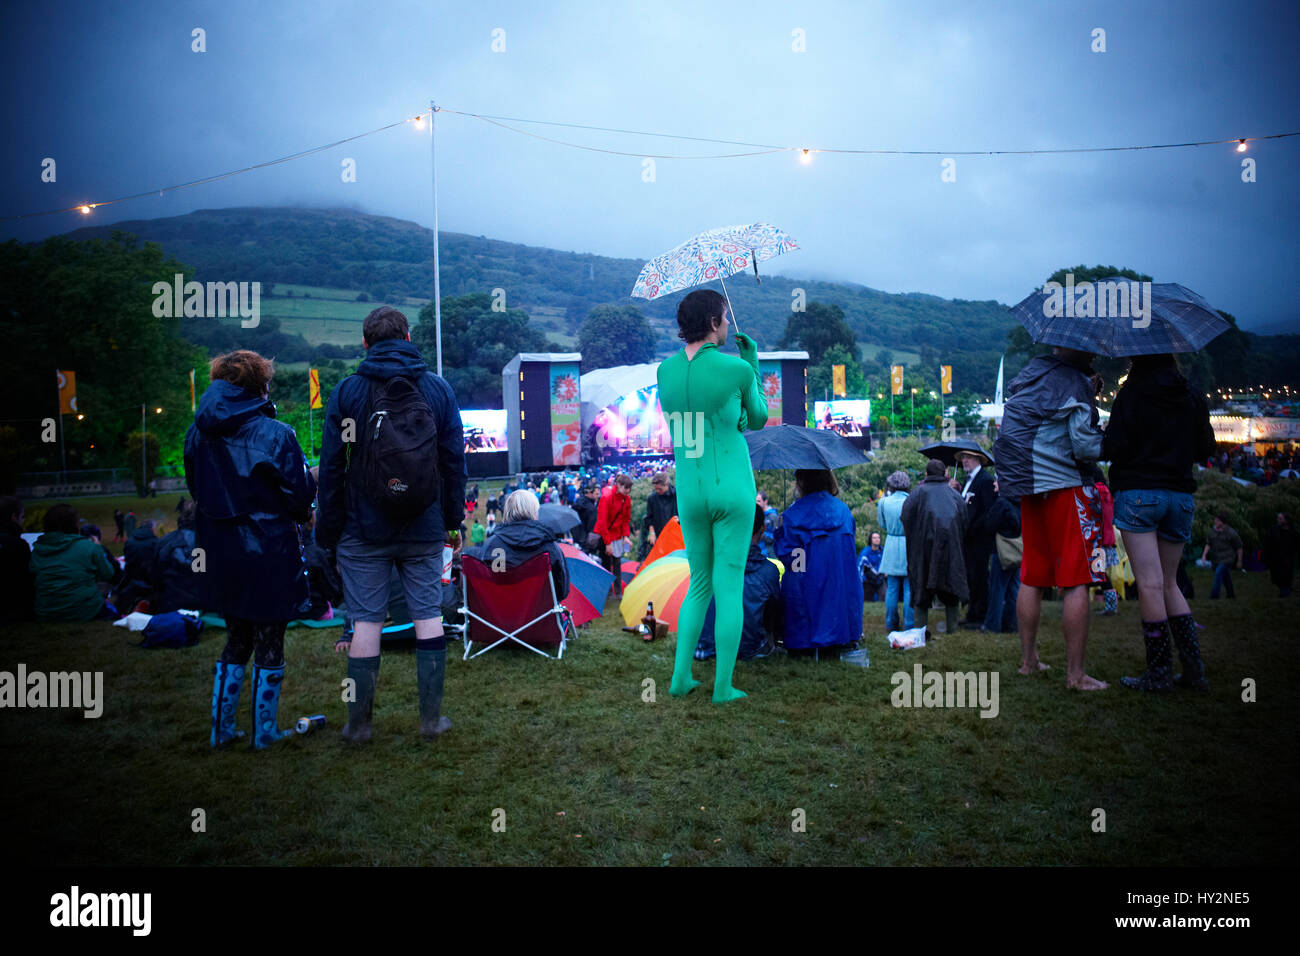 Man standing in a crowd wearing a green leotard with an umbrella watching live bands, The Green Man Festival, Wales. Stock Photo